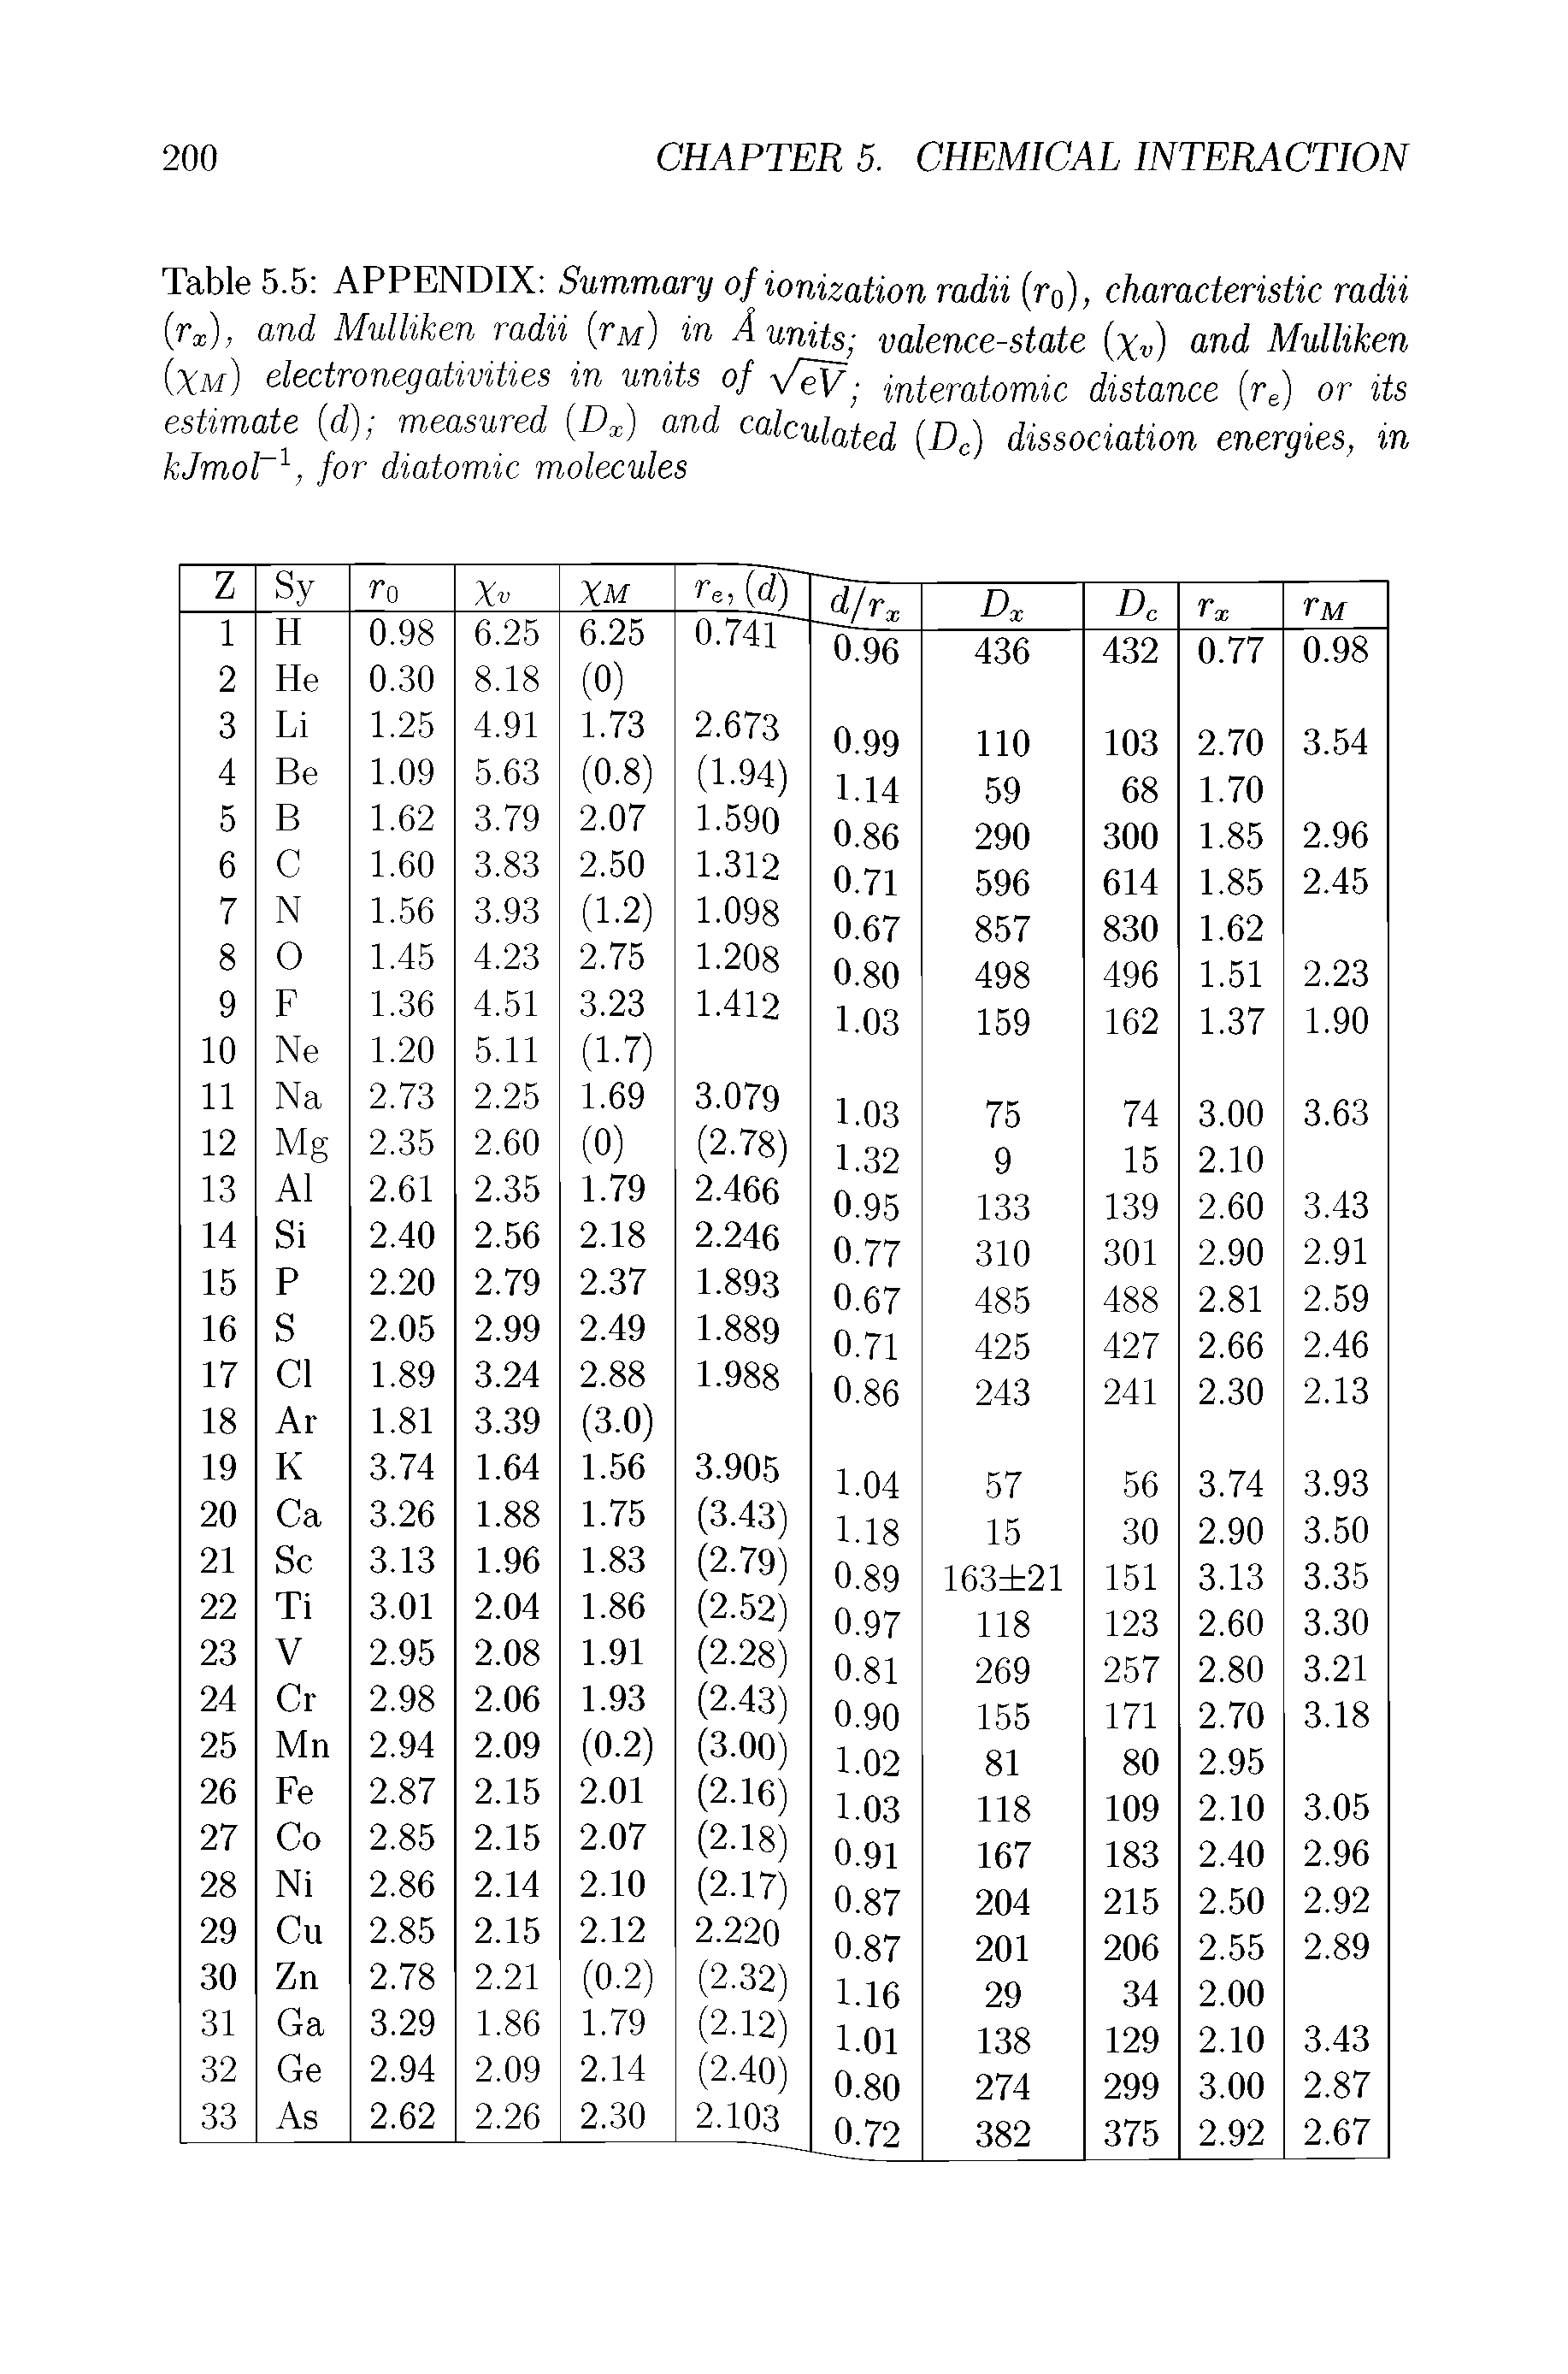 Table 5.5 APPENDIX Summary of ionization radii (r o), characteristic radii (rx), and Mulliken radii (Vm) in A units valence-state (xv) and Mulliken (xm) electronegativities in units of VeV interatomic distance (re) or its...